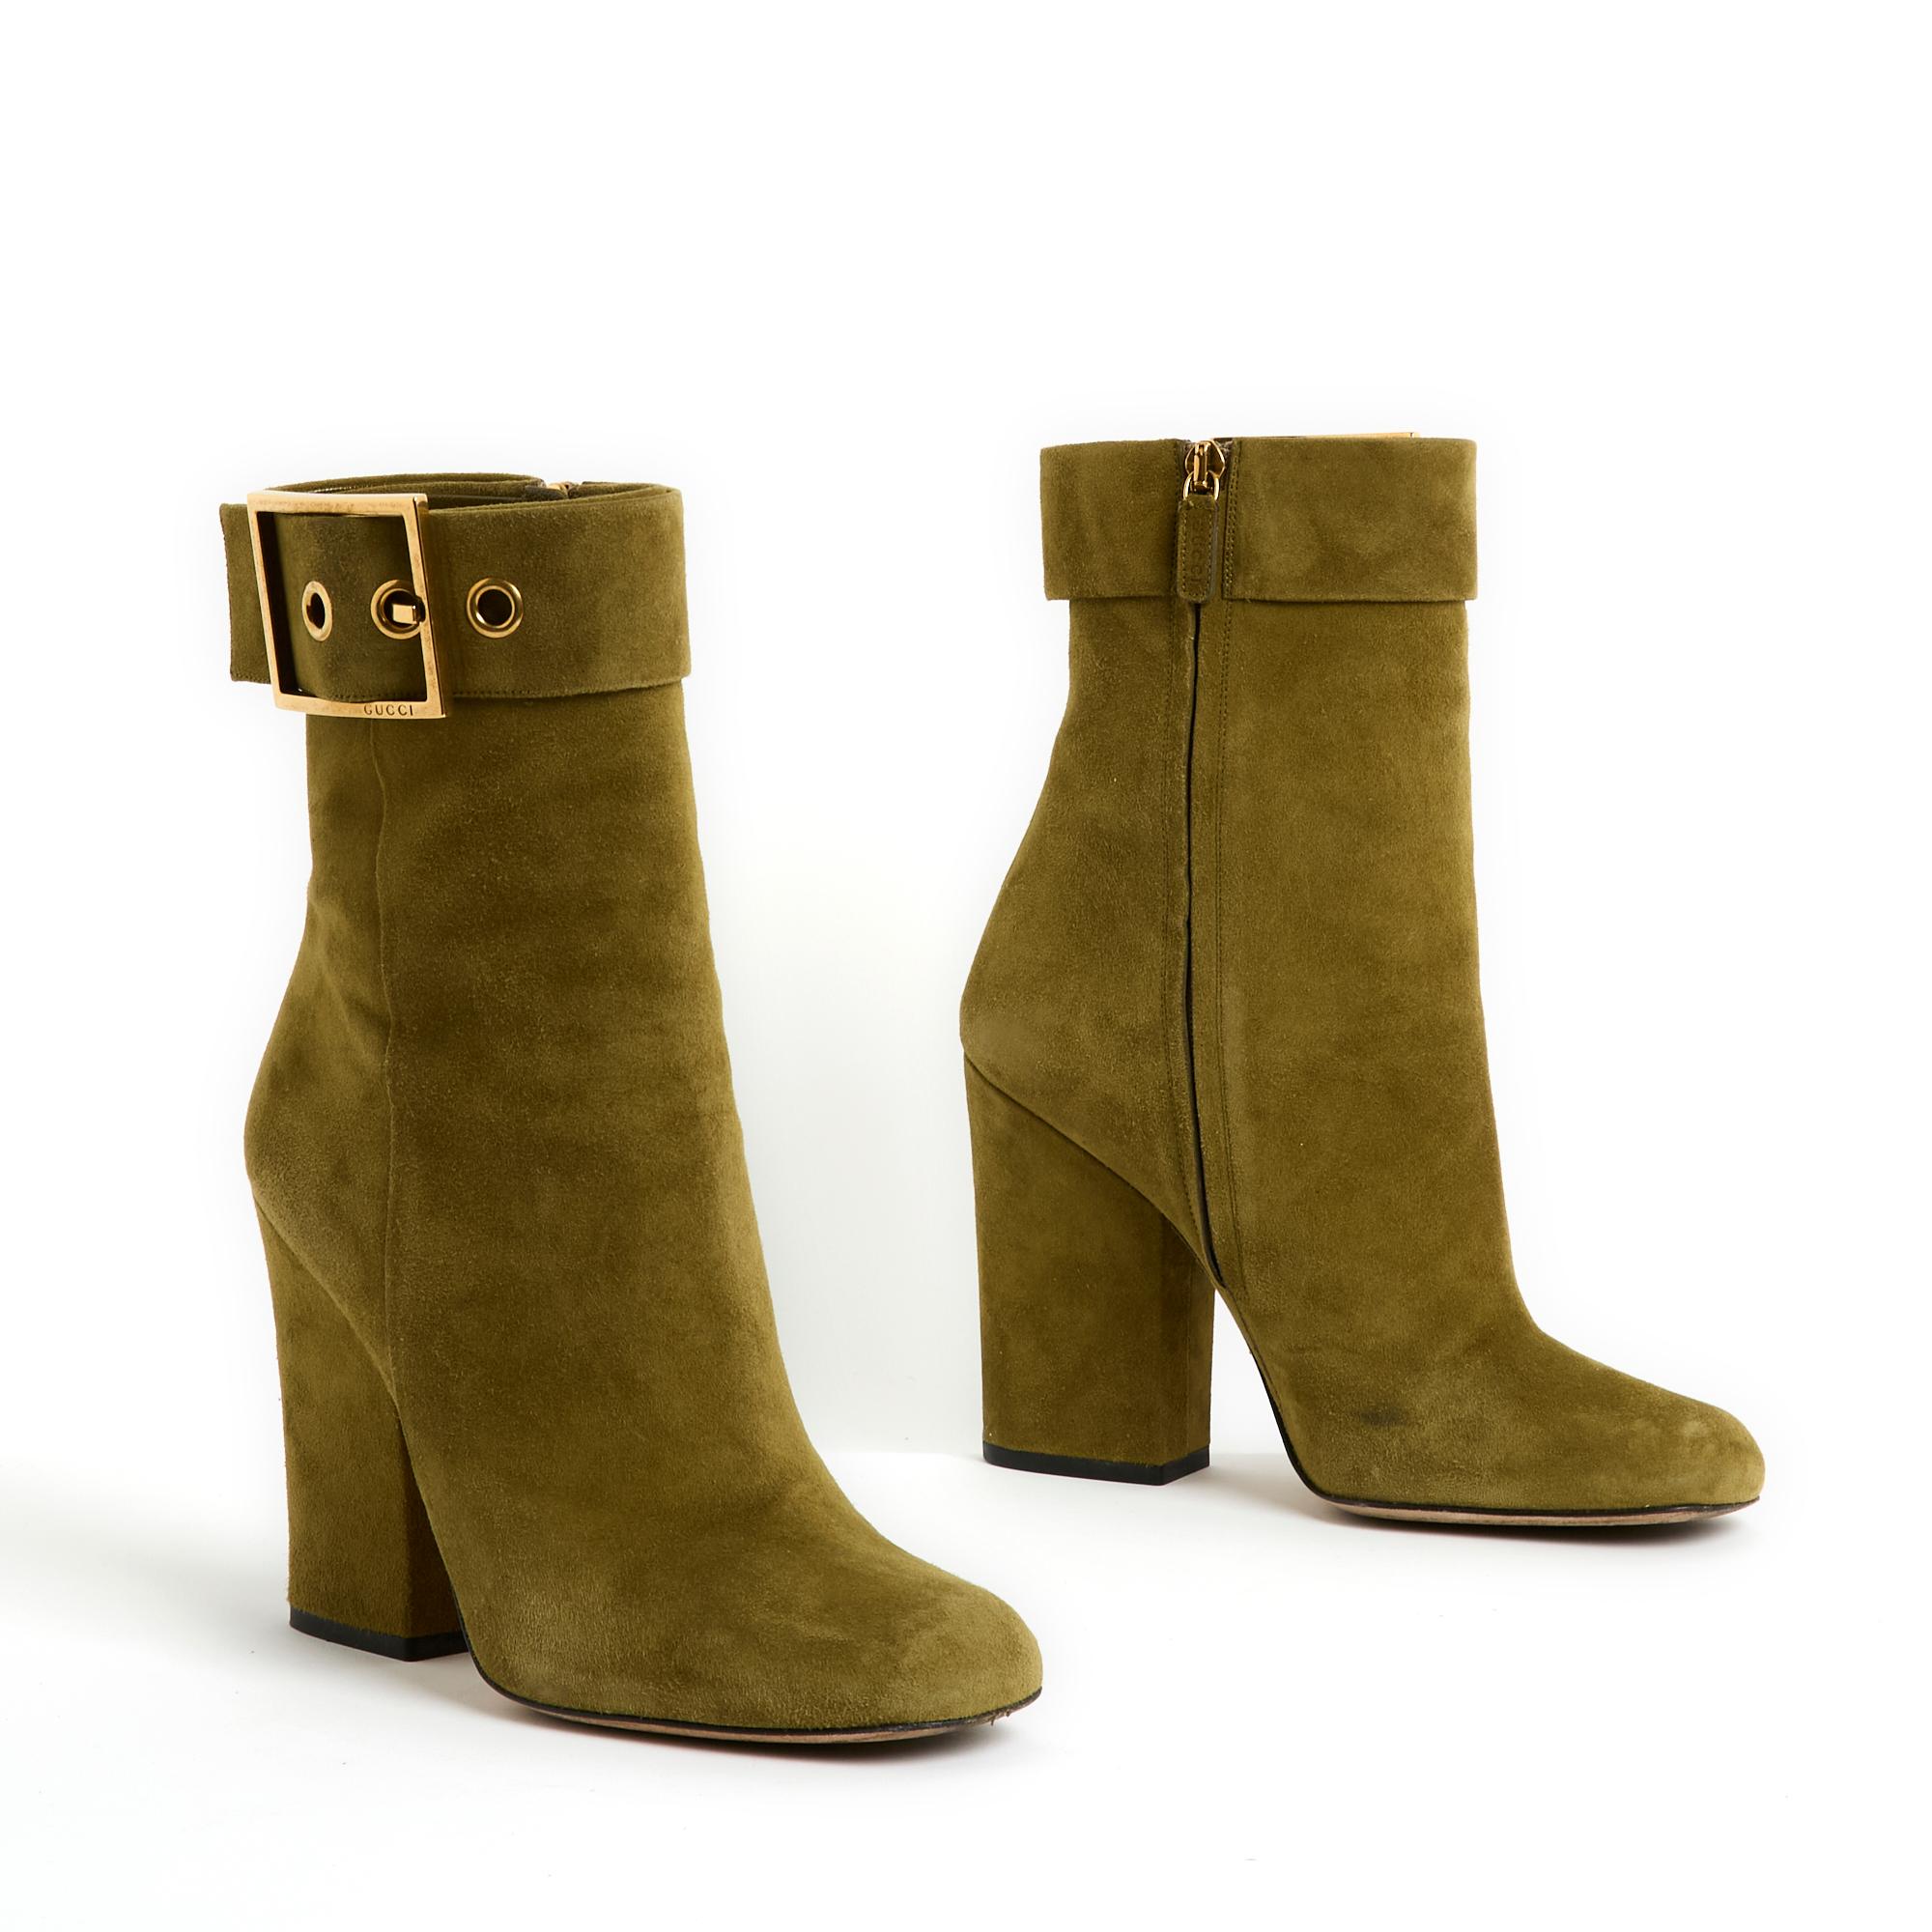 Gucci boots, with wide heel, in olive green suede with large square gold metal buckle with Gucci logo, slightly square rounded toe, zip closure inside the ankle. Size 39EU, heel 10 cm, insole 25 cm, upper 15.5 cm. The boots have been worn and the